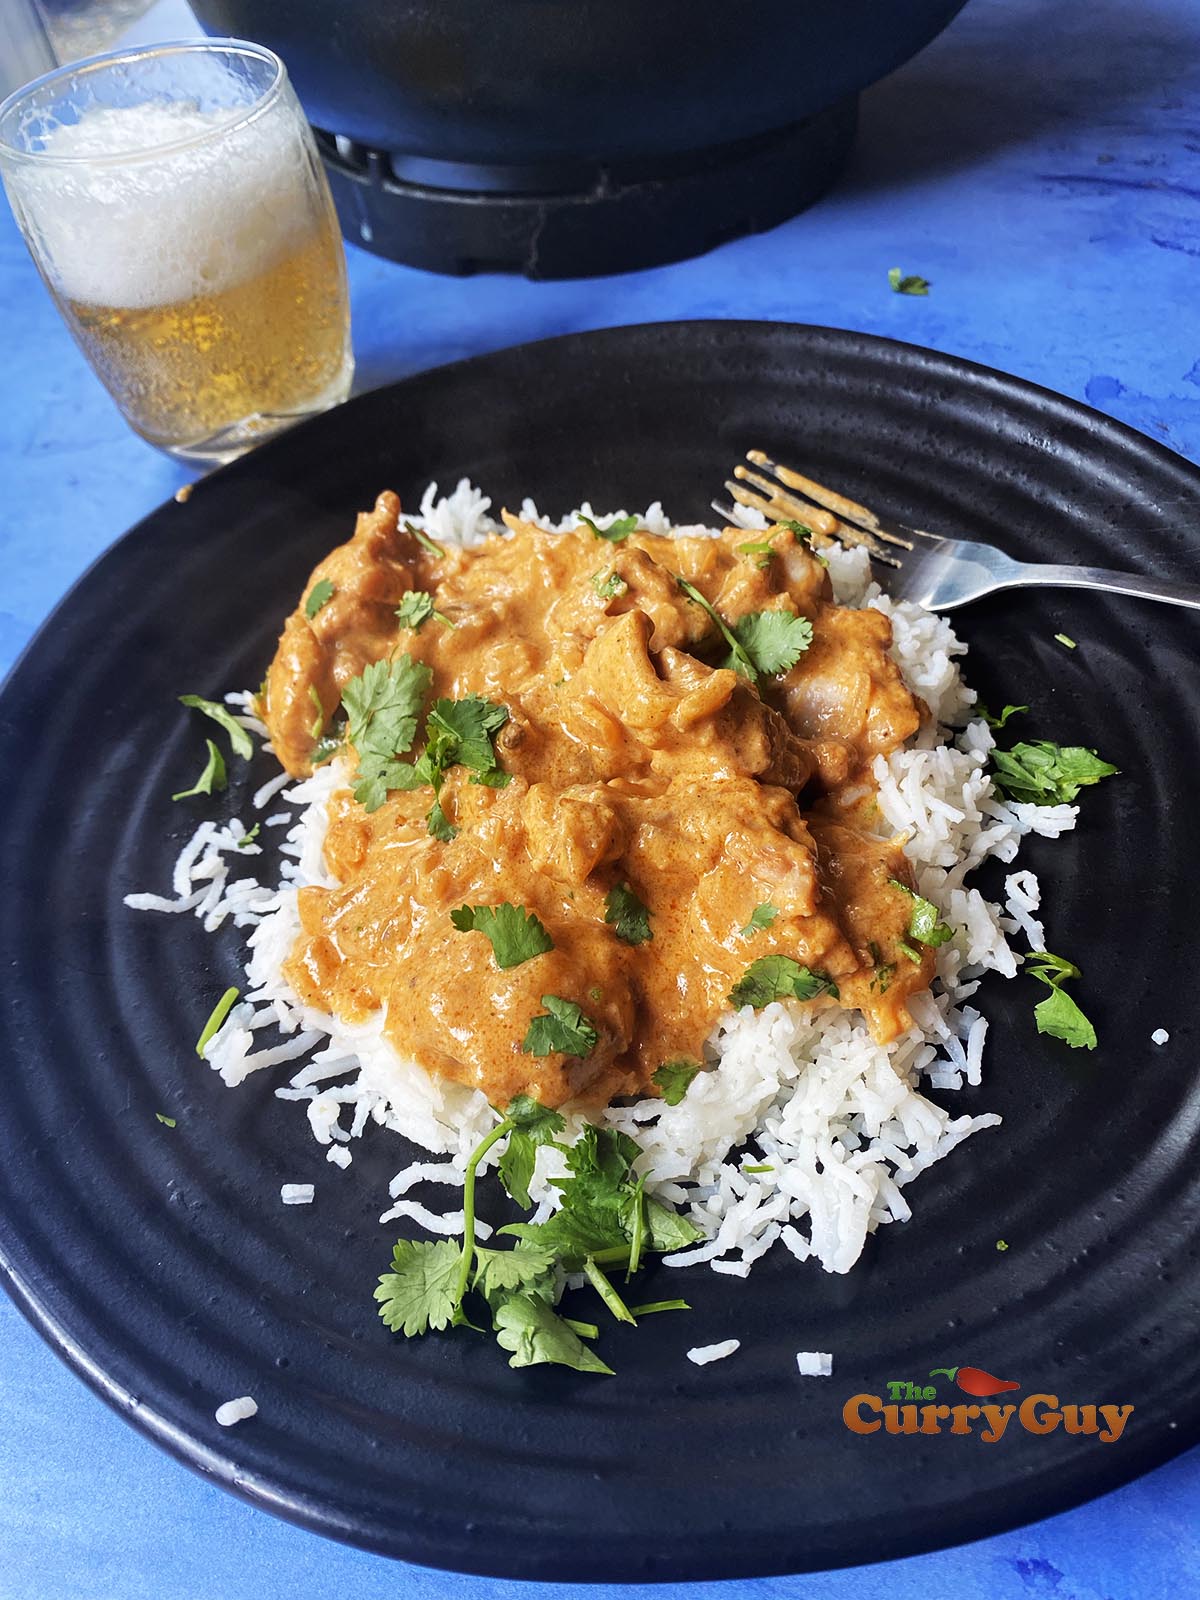 Chicken korma without base sauce